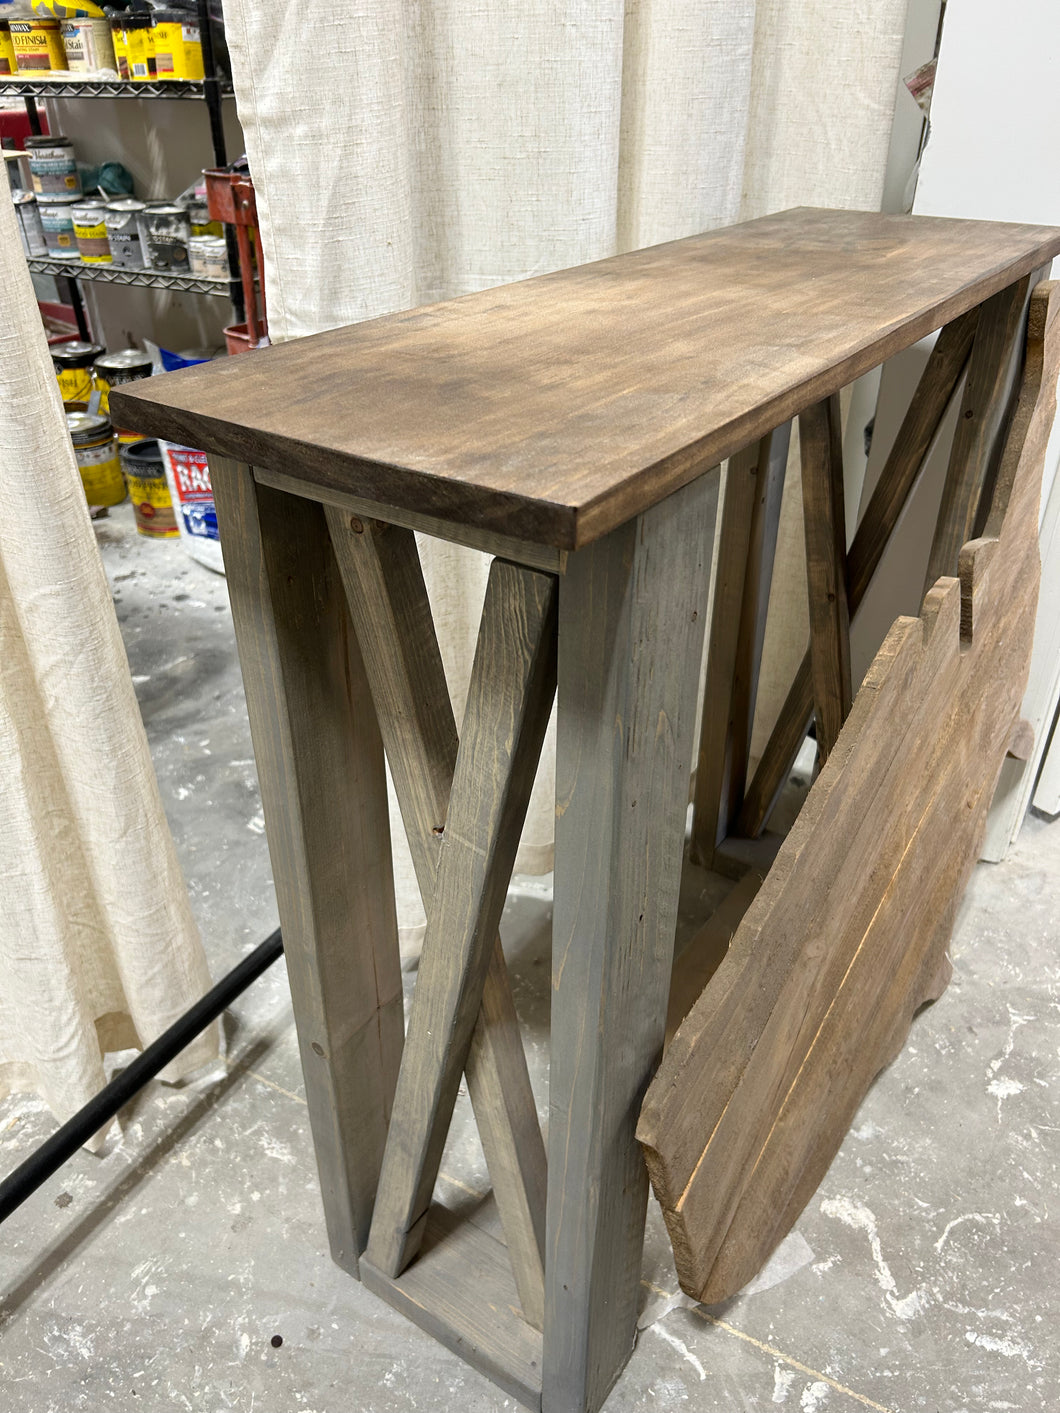 Entryway Table with X Accents (Provincial and Gray)